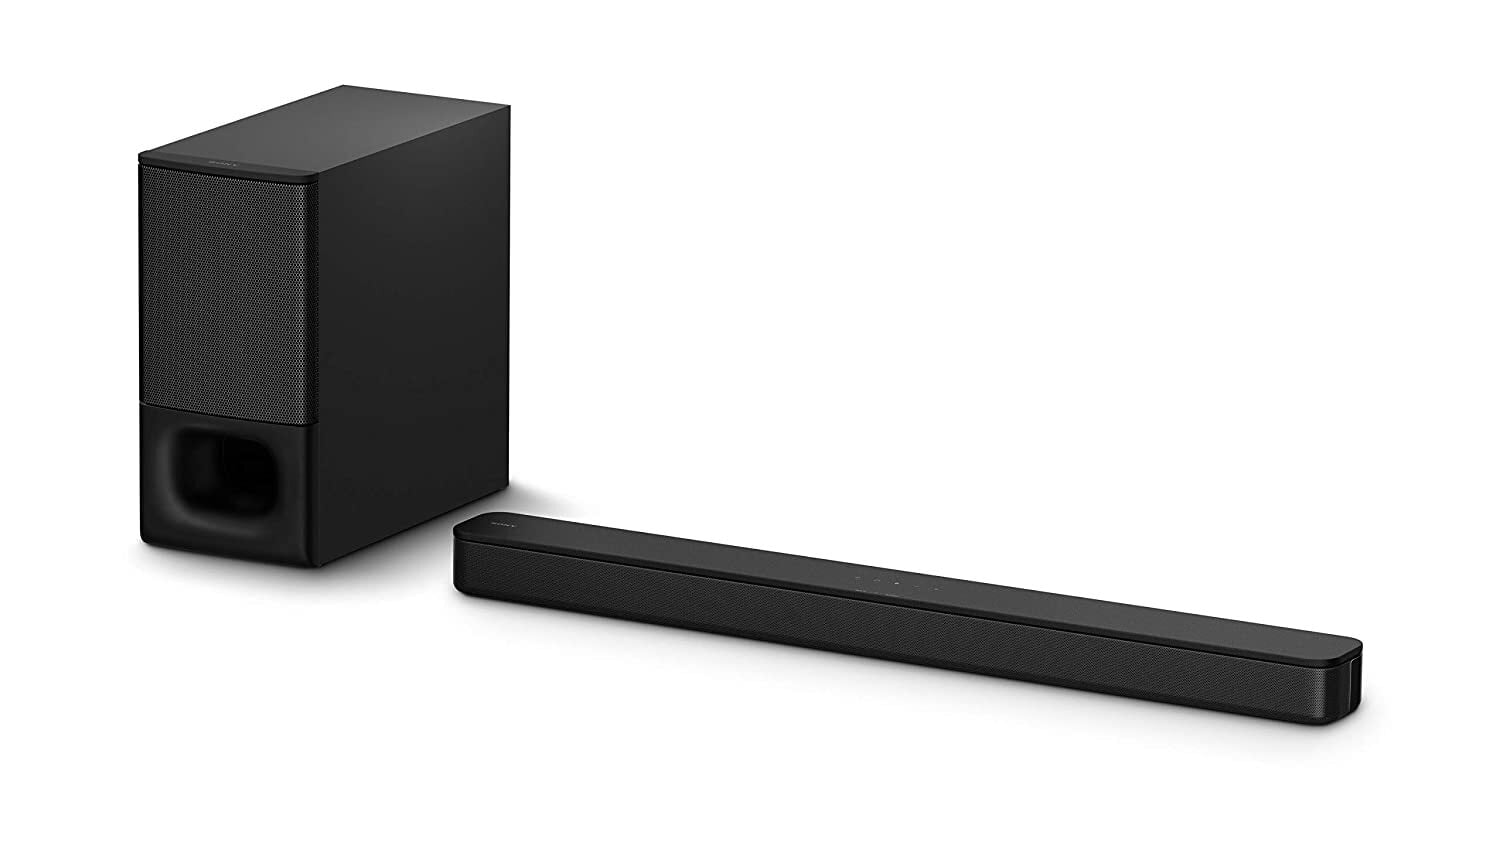 Sony HT-S350 2.1 Channel Soundbar With Subwoofer On Dillimall.Com